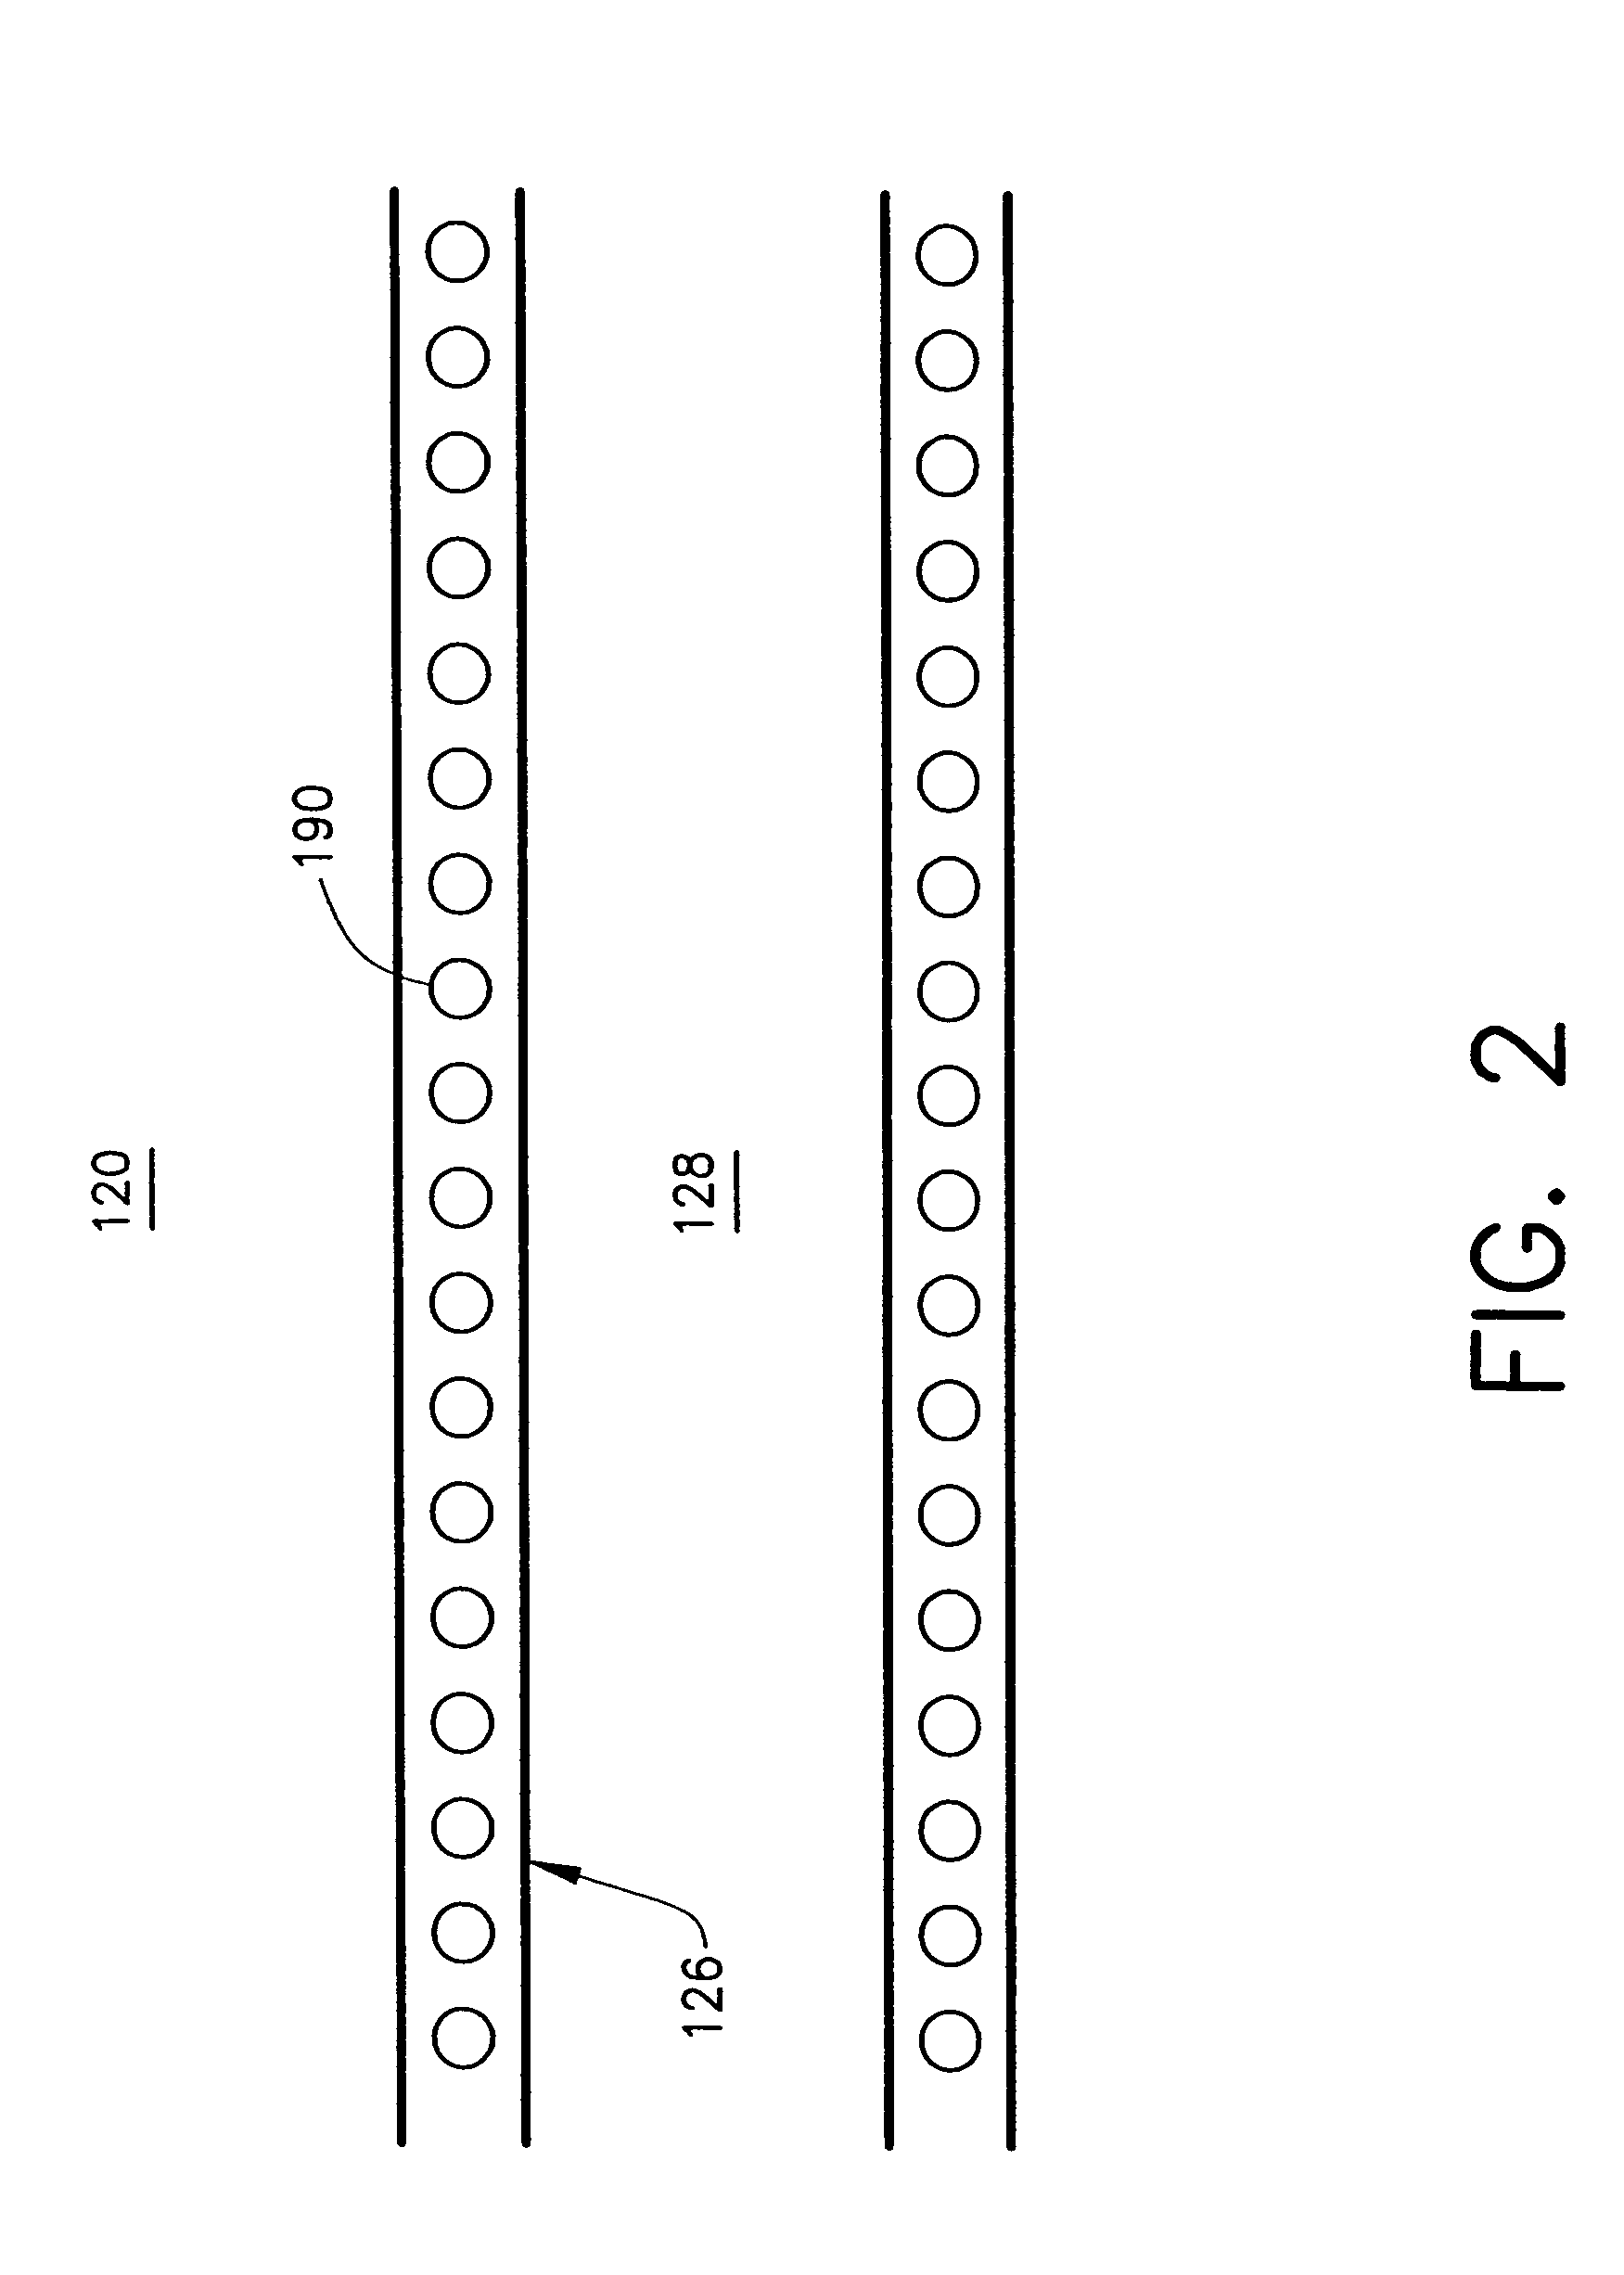 Magnetically enhanced injection catheter